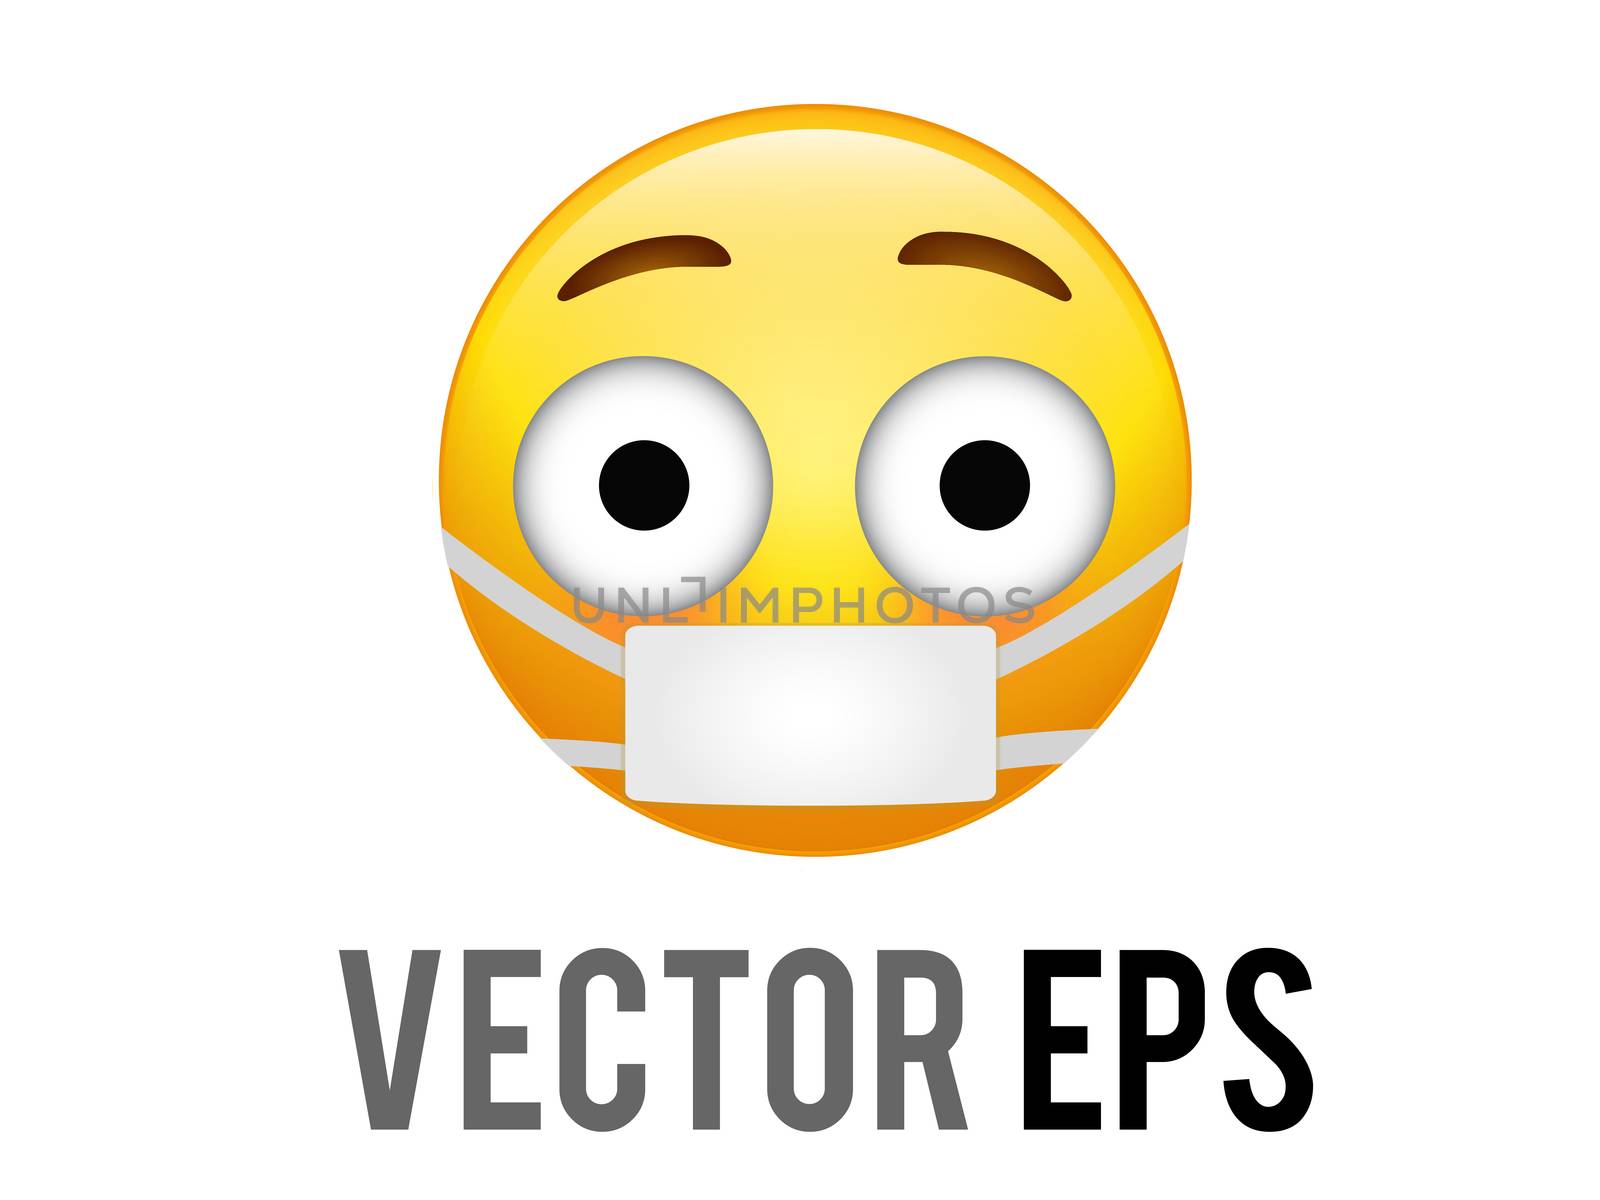 The isolated vector yellow embarrassed face icon with flushed red cheeks and mask